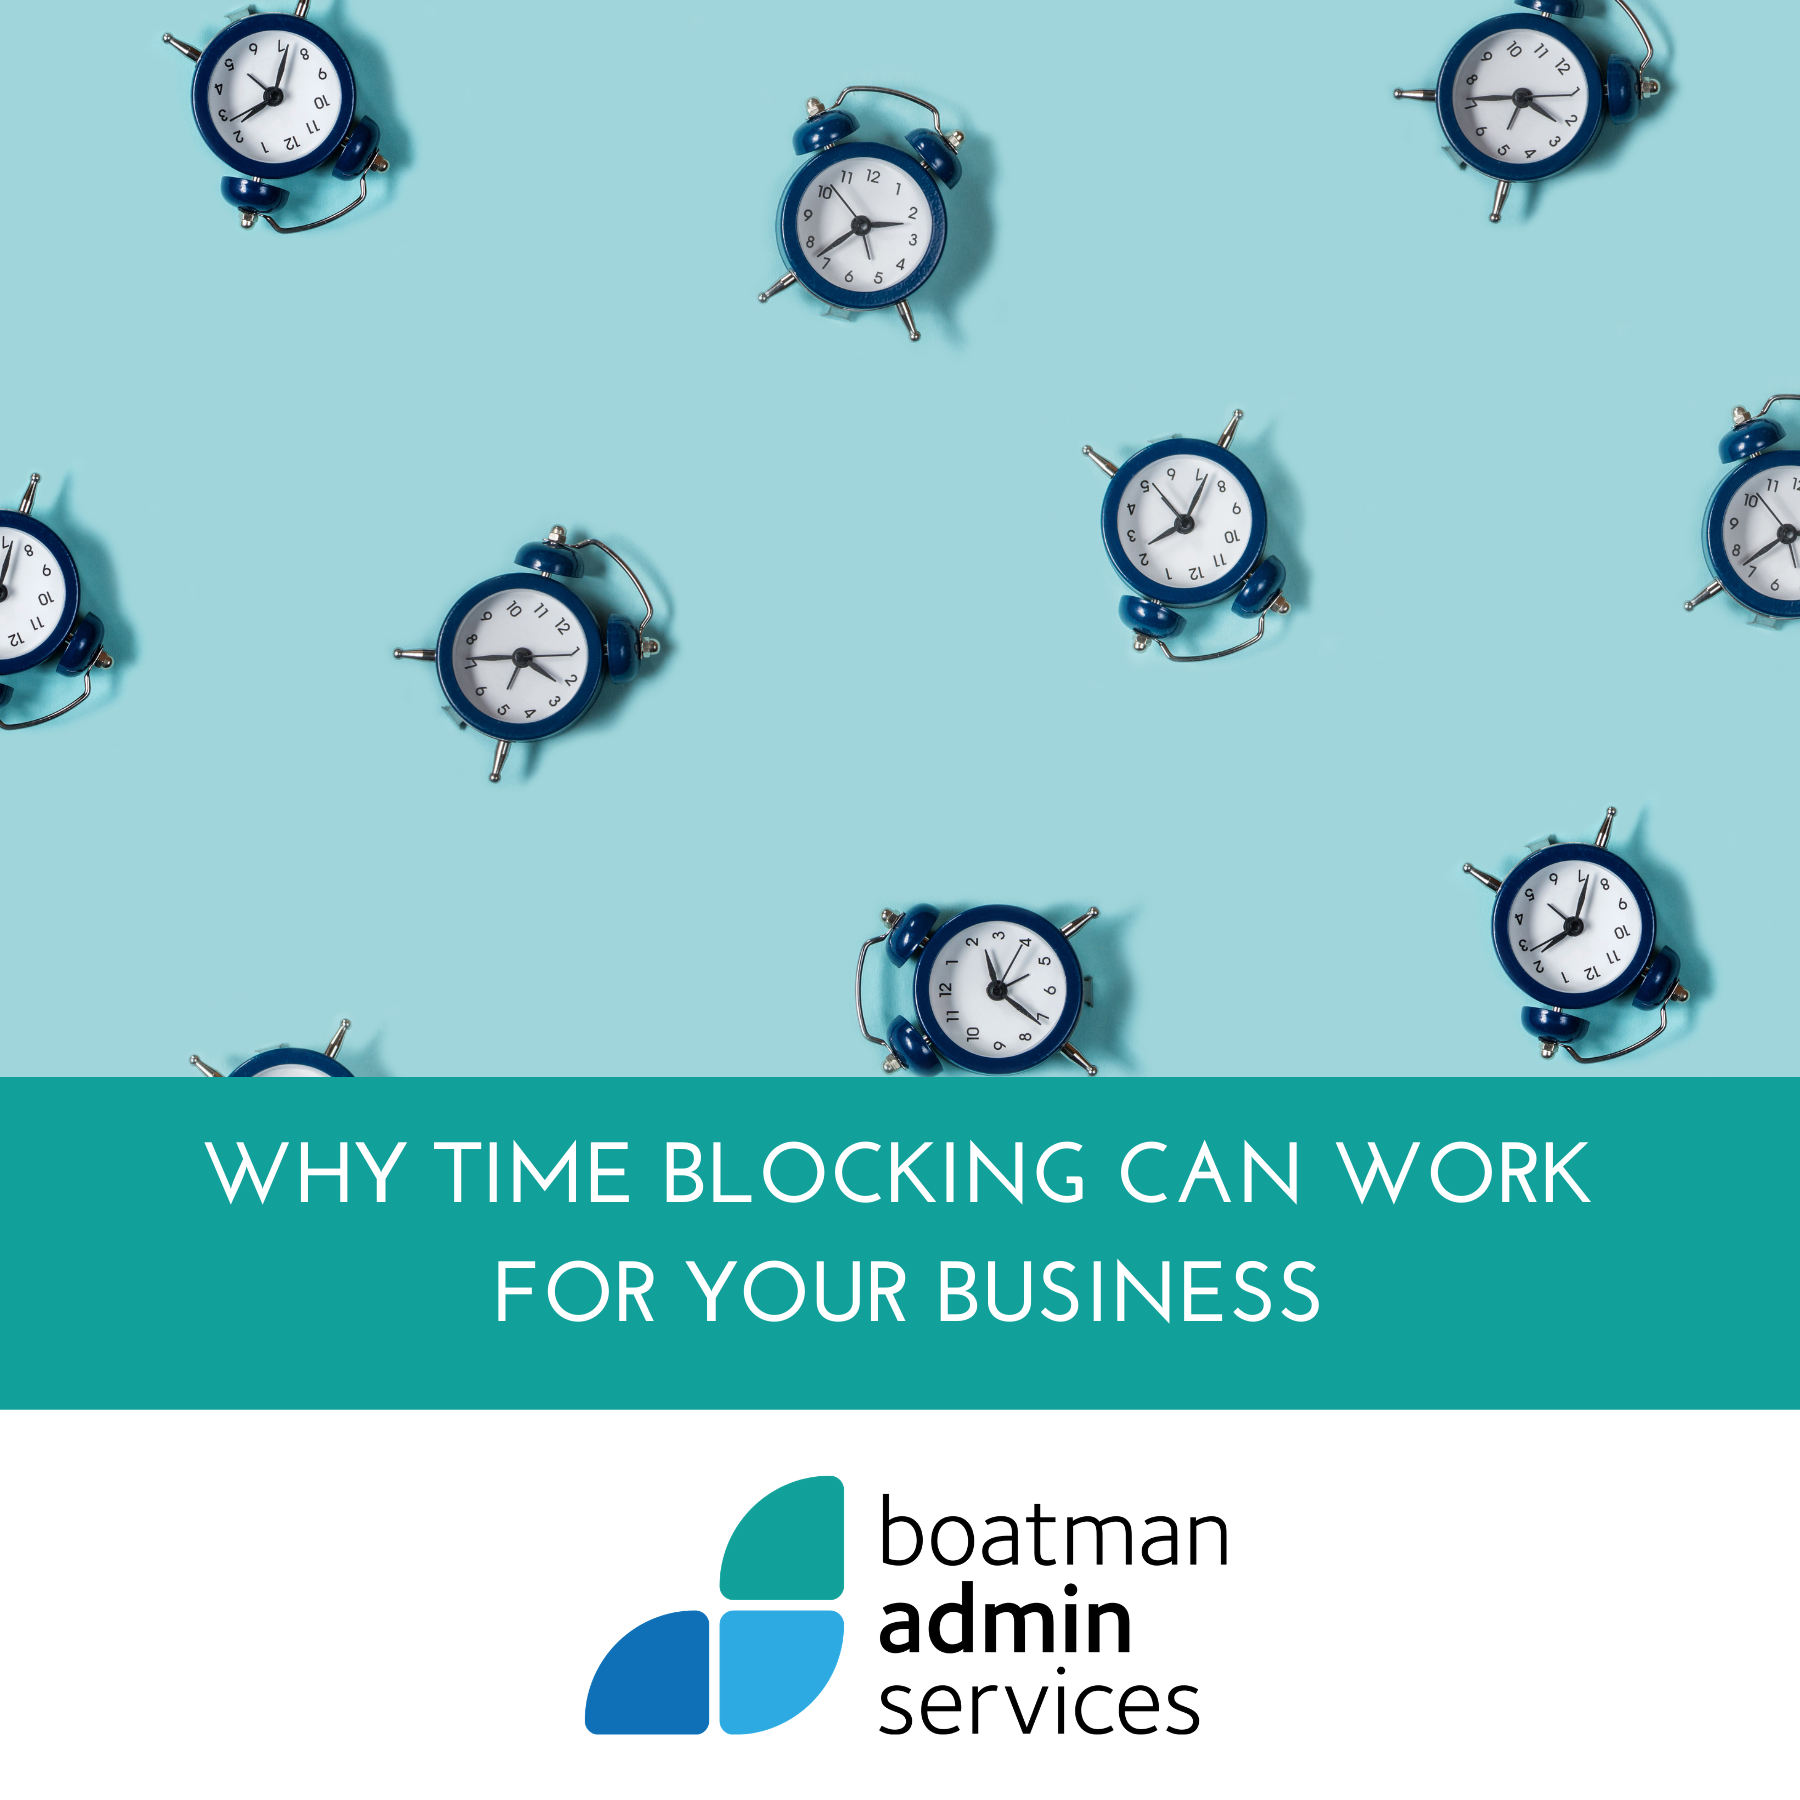 Why time blocking can work for your business